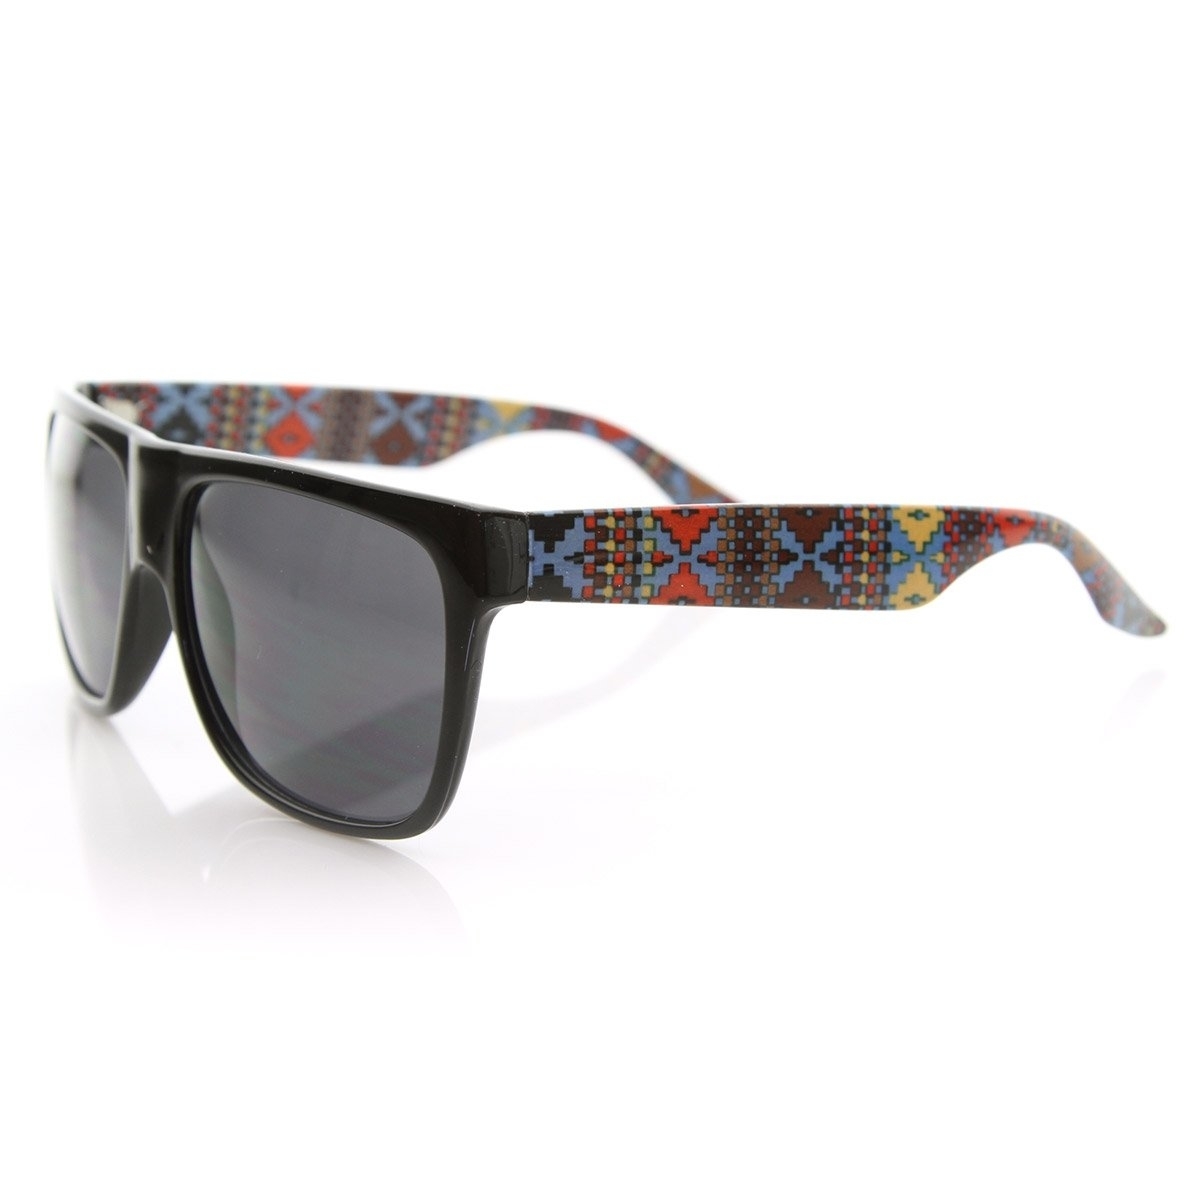 Native Print Classic Retro Fashion Flat Top Horn Rimmed Style Sunglasses - Brown